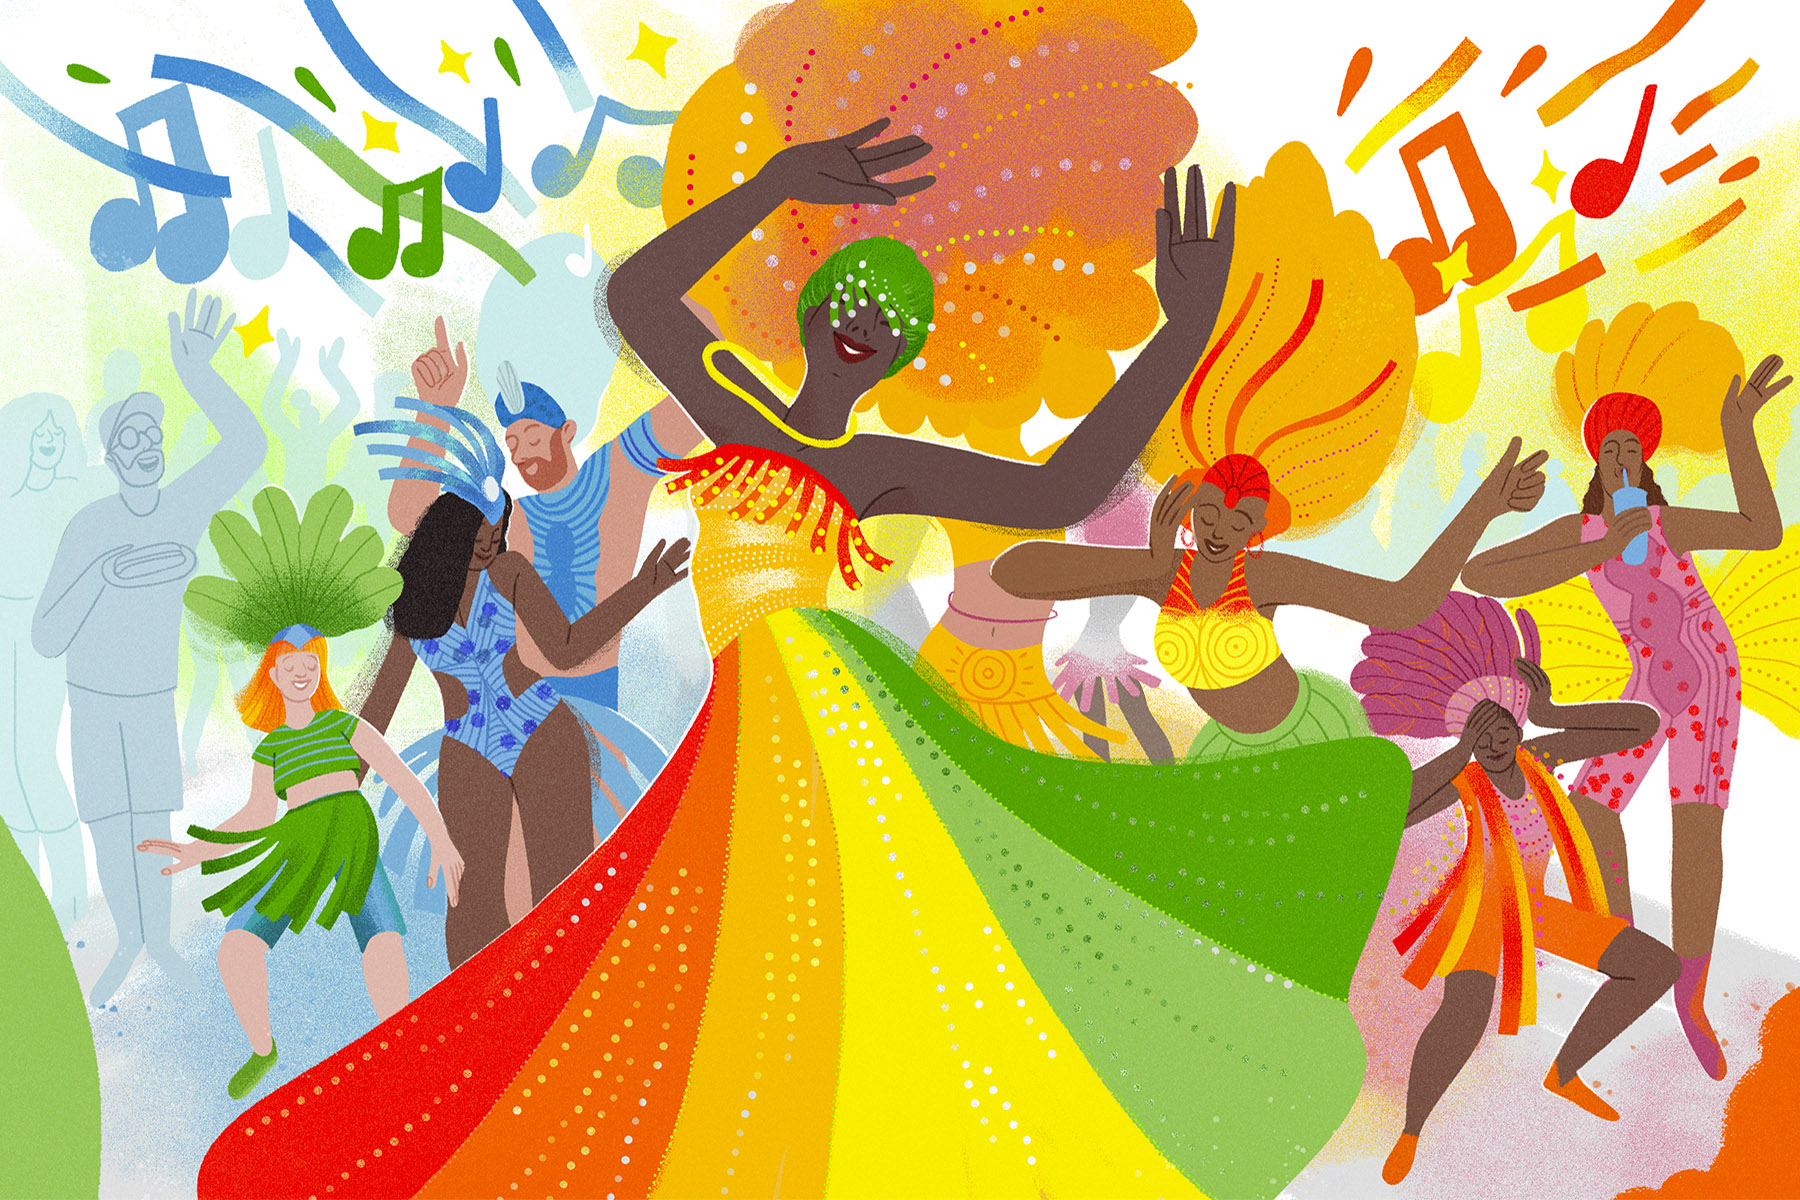 An illustration of a black woman dancing in a red, yellow, orange and green dress, with festively dressed partygoers all around her in bold colours.